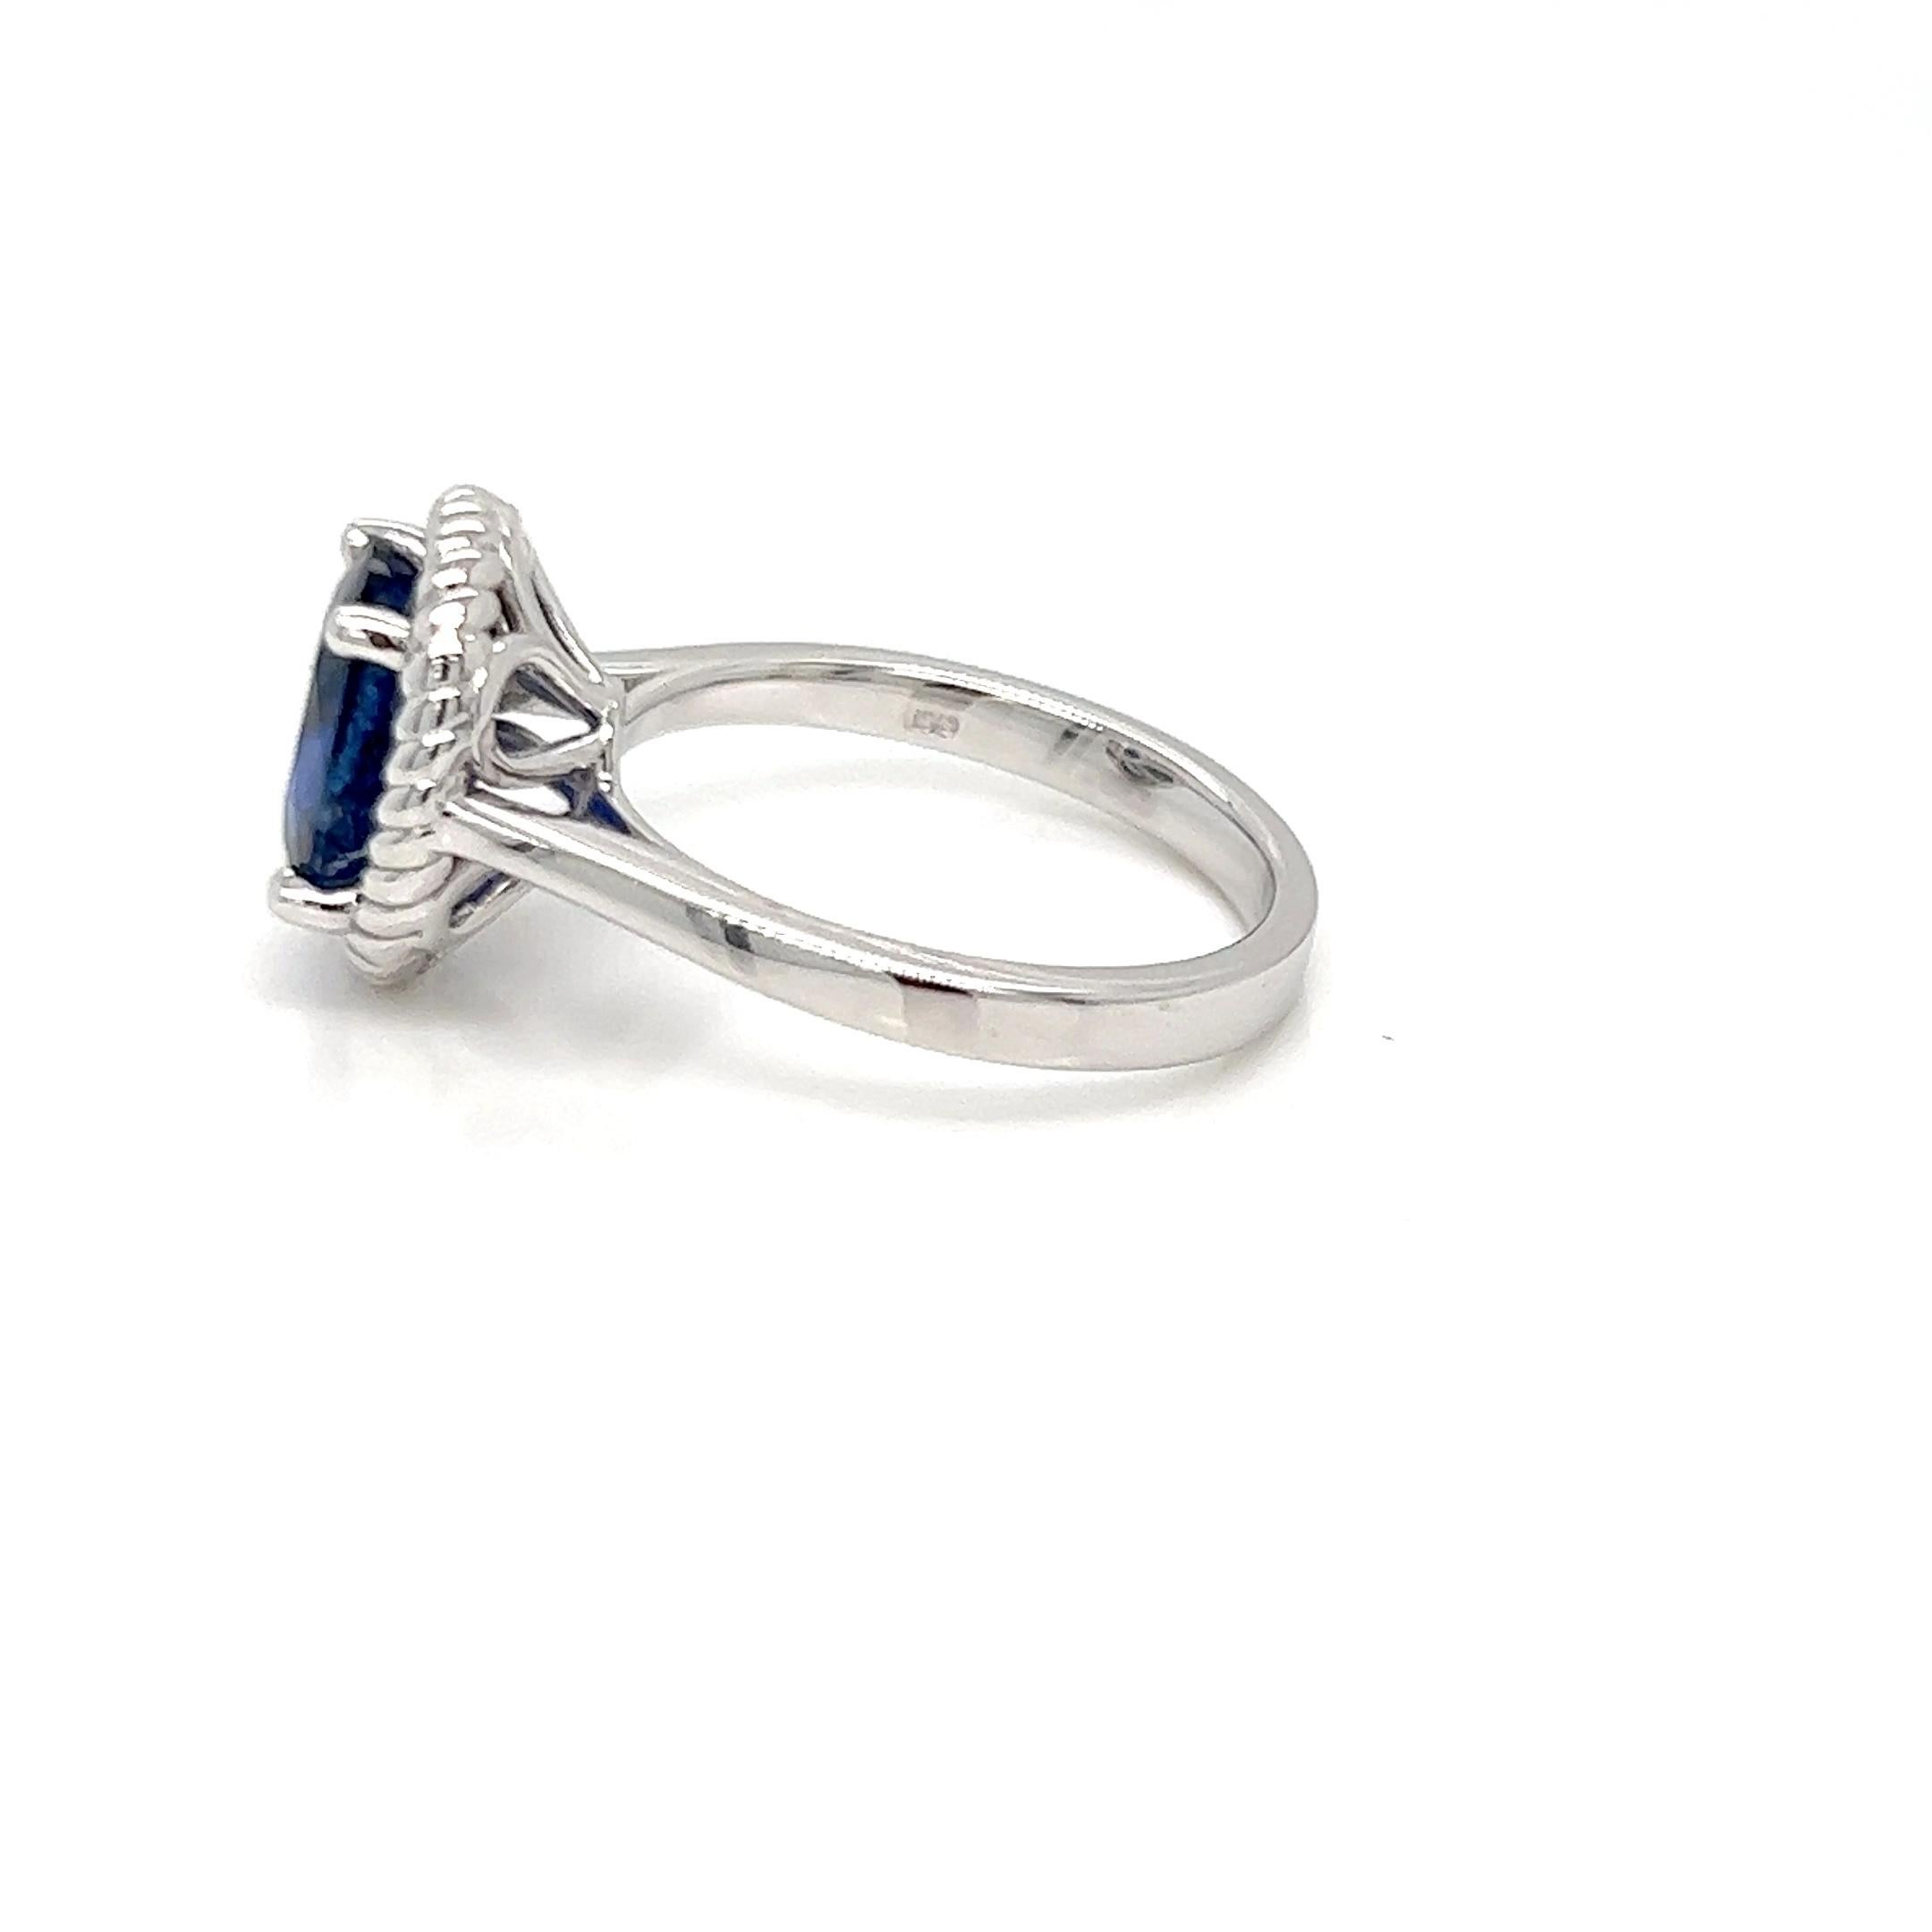 This unique solitaire ring consists a single piece of 3.00 carats of beautiful Sapphire. The sapphire is sourced from Sri Lanka which is known for its sapphires of greenish blue hue. Also known as Ceylon sapphire, this ring is worth every penny and